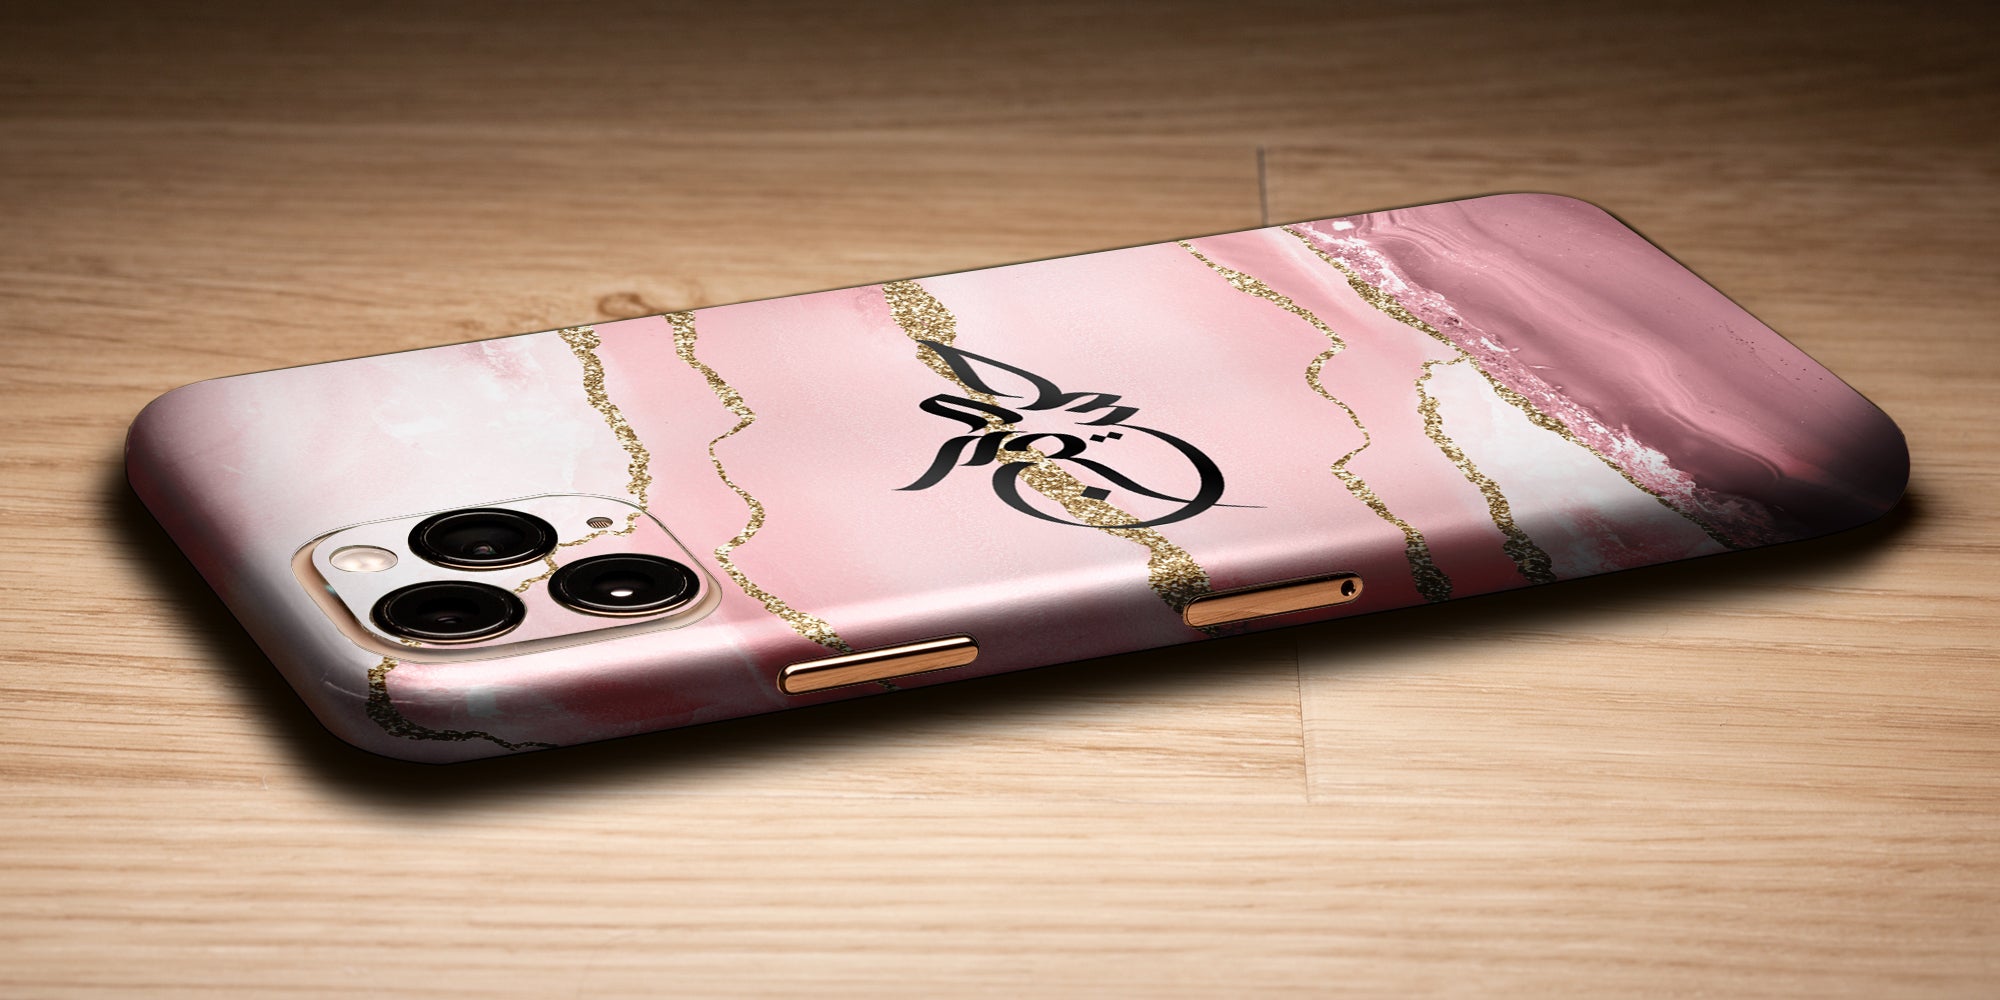 Agate Design Decal Skin With Personalised Arabic Name Phone Wrap - Blush Pink